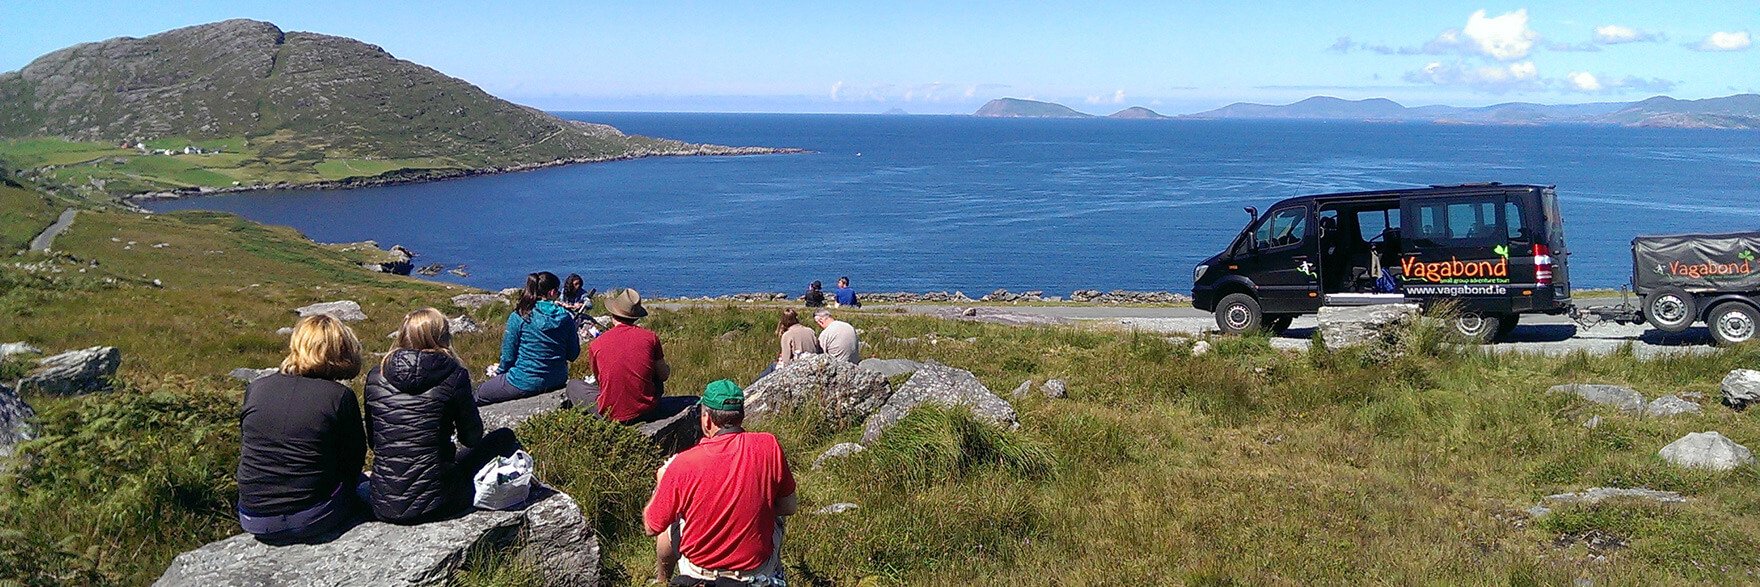 A Vagabond Tour Group picnicking in a scenic location in Ireland with a 4x4 VagaTron tour vehicle parked nearby